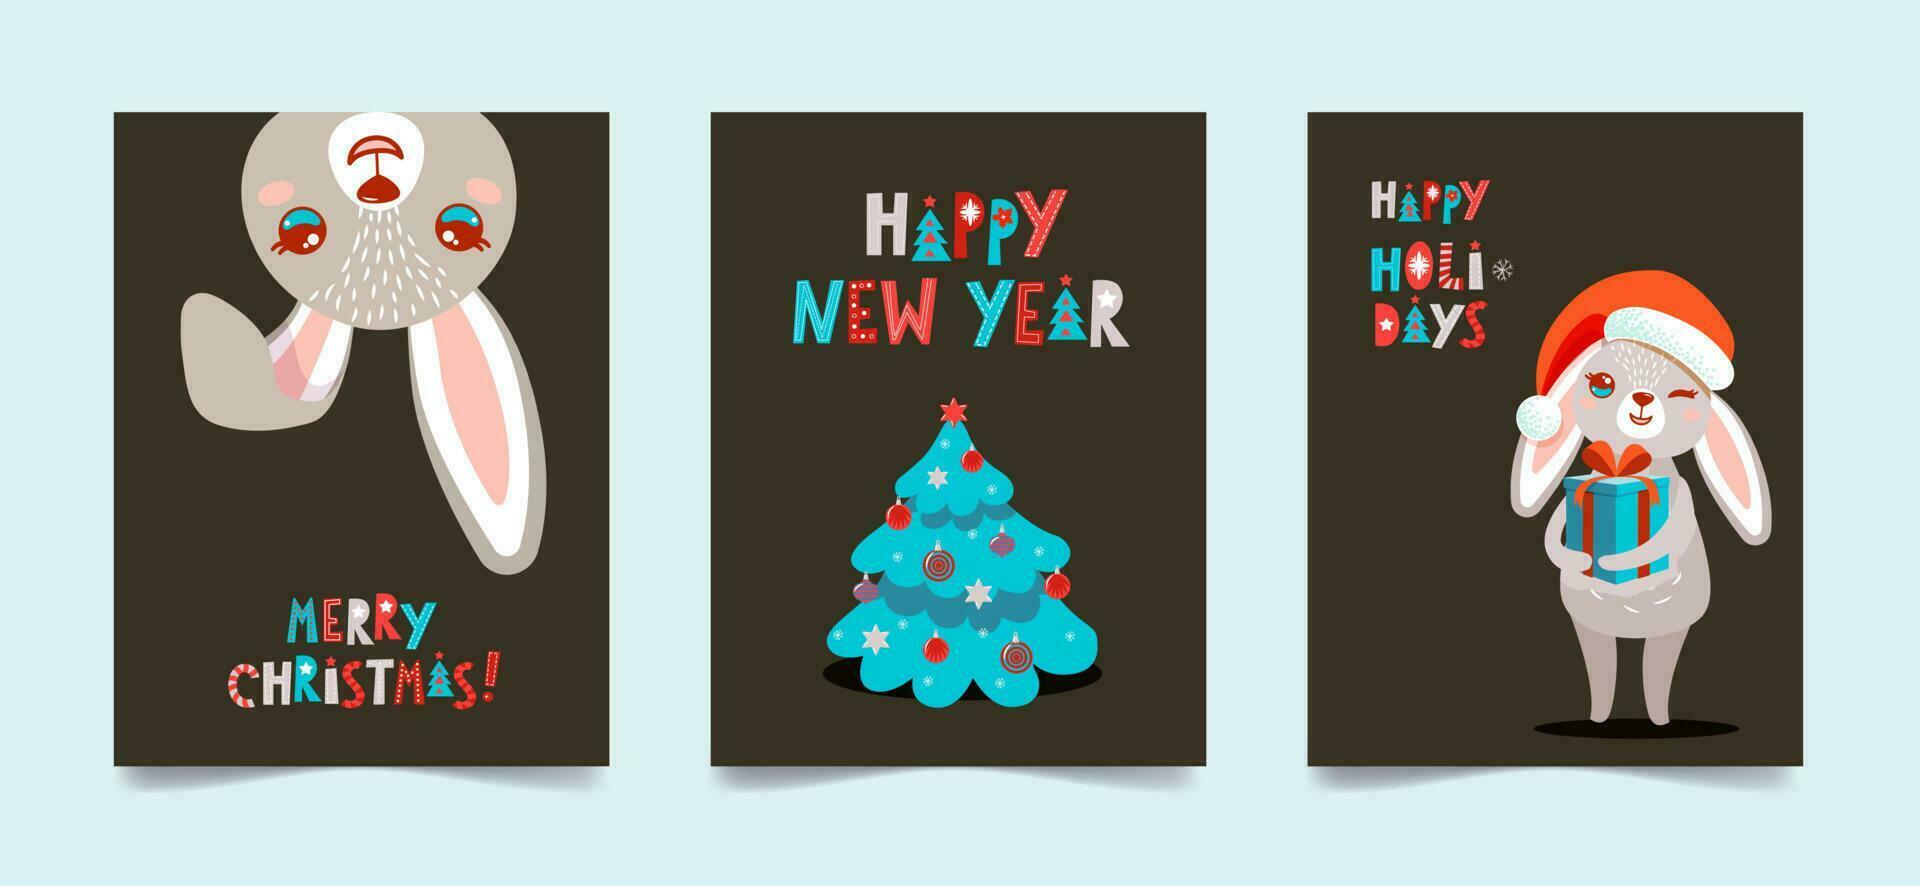 Set of Christmas cards with cute bunnies and Christmas tree.Seasonal greetings. Happy holidays, merry christmas and happy new year vector